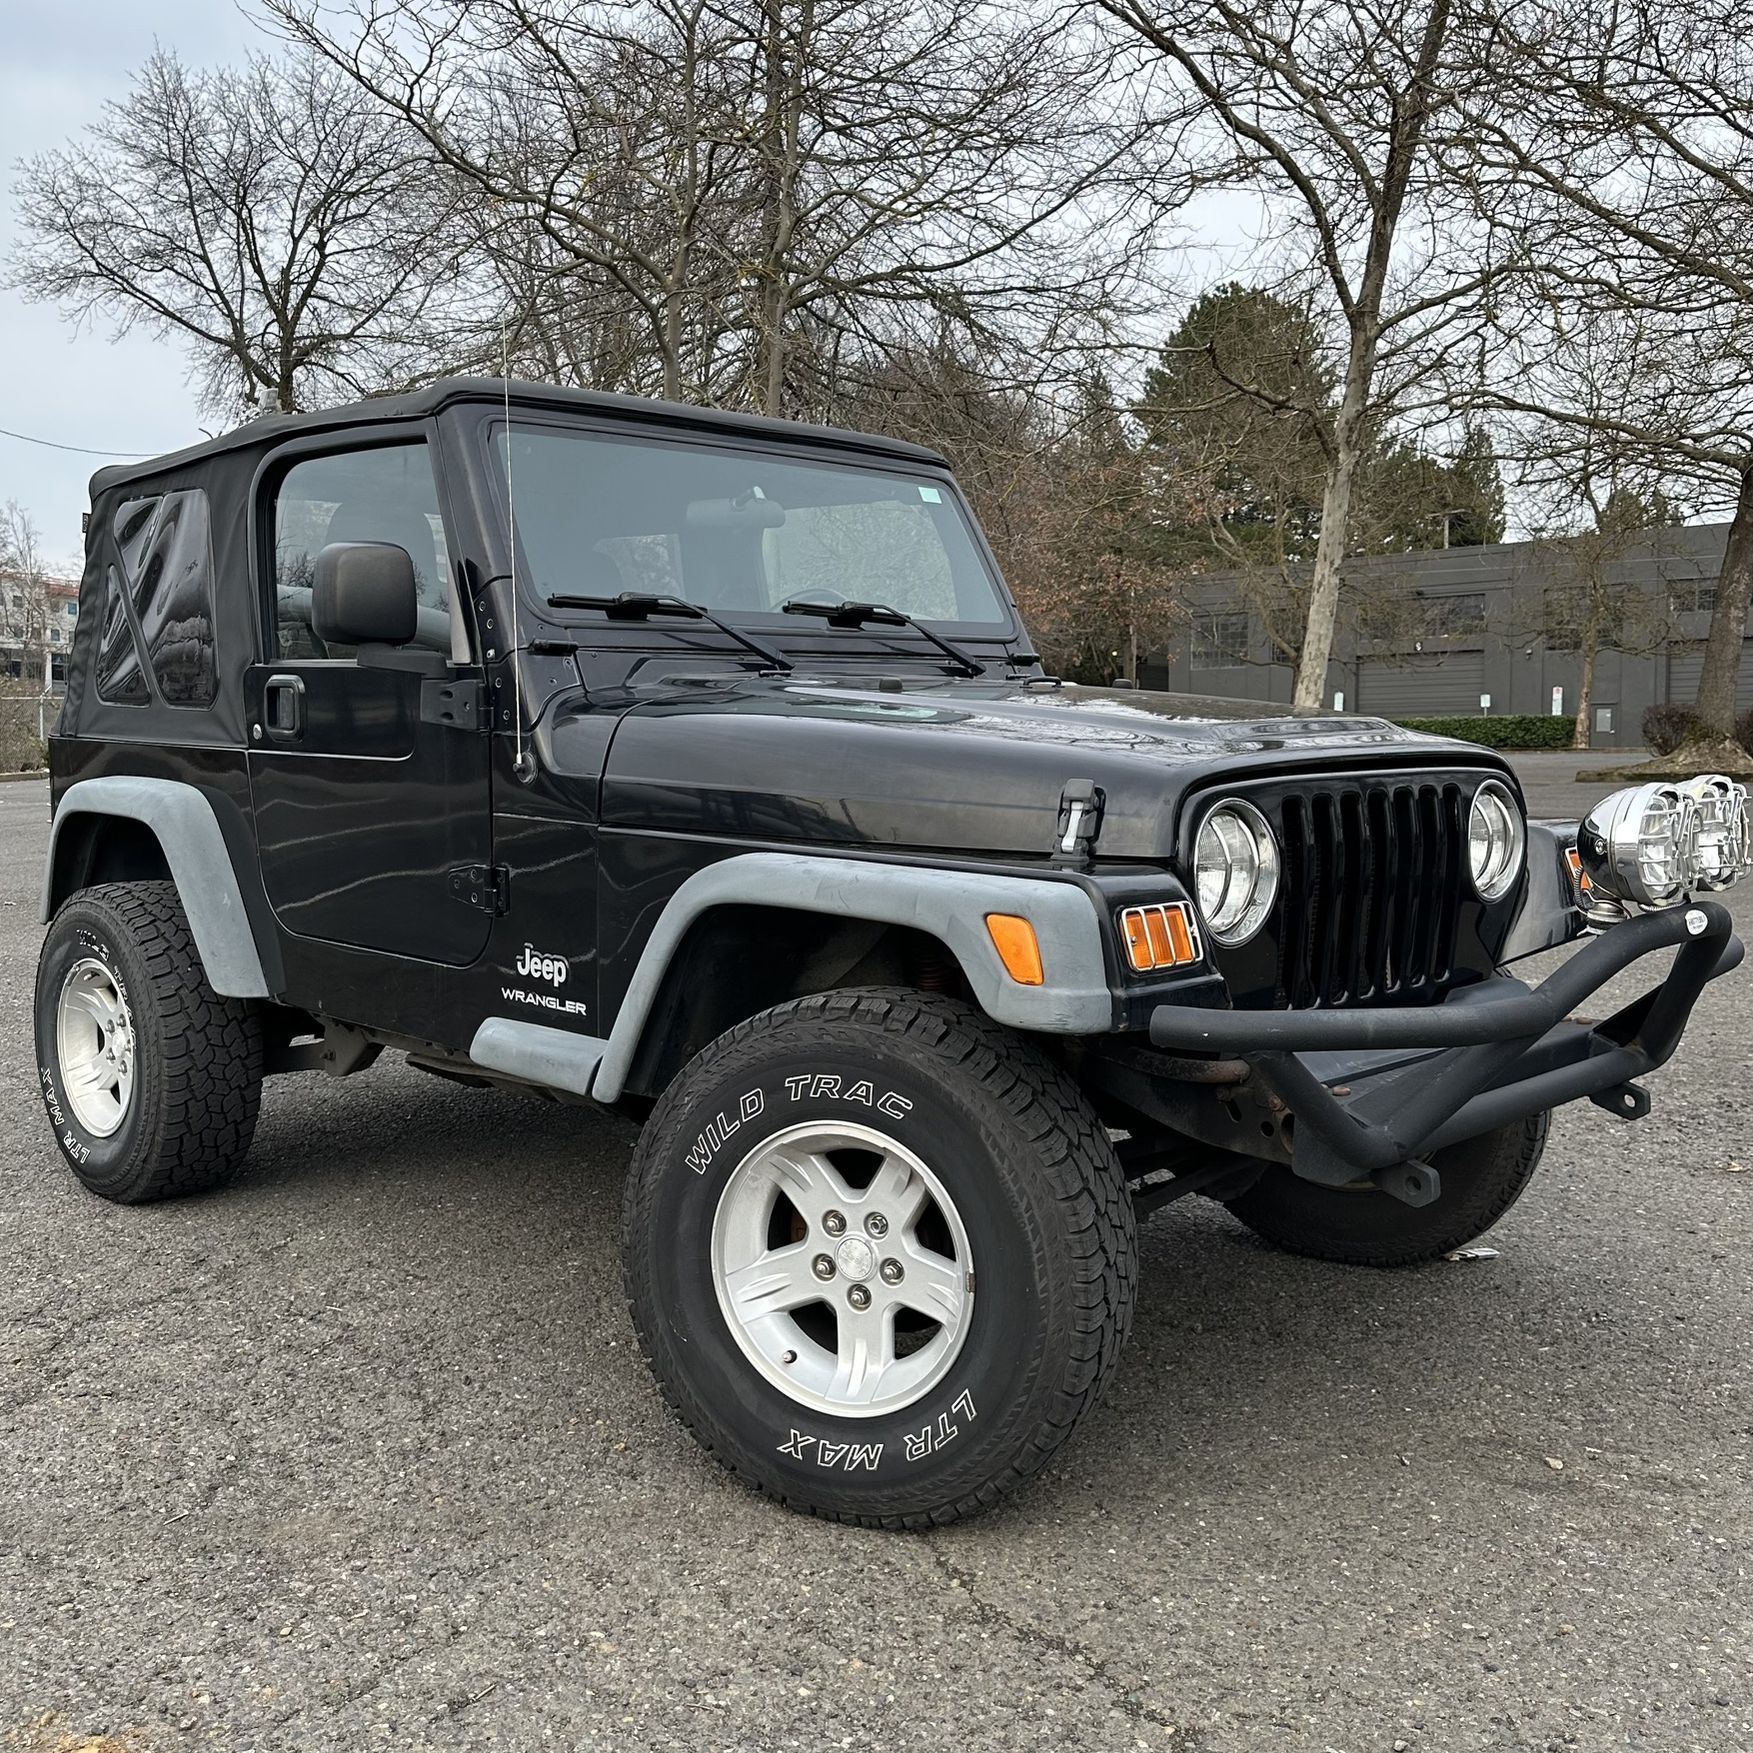 2006 Jeep Wrangler for Sale in Tigard, OR - OfferUp